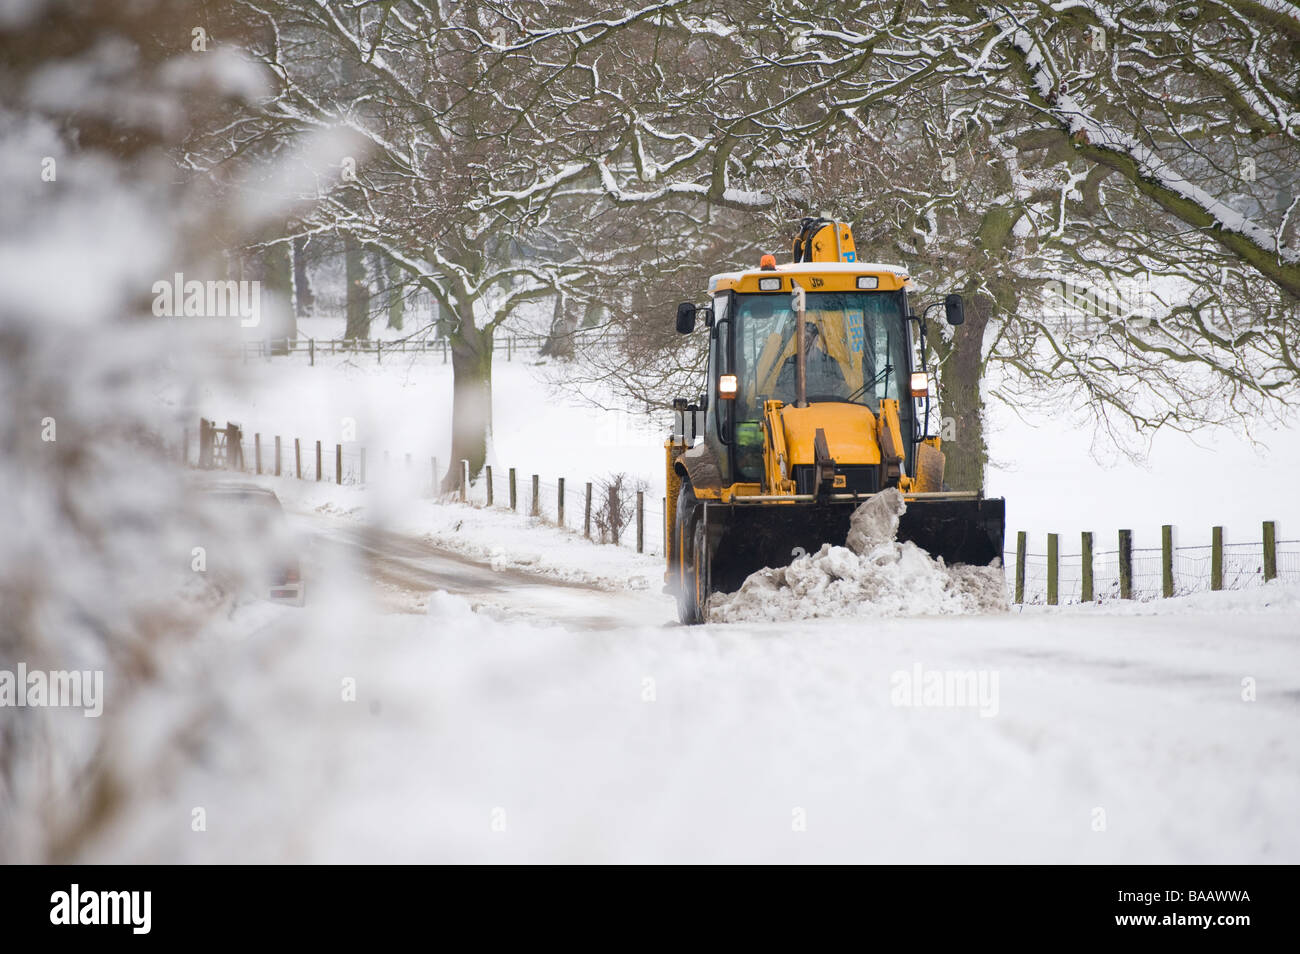 JCB being used to clear a snow covered road in the countryside in England at winter time Stock Photo